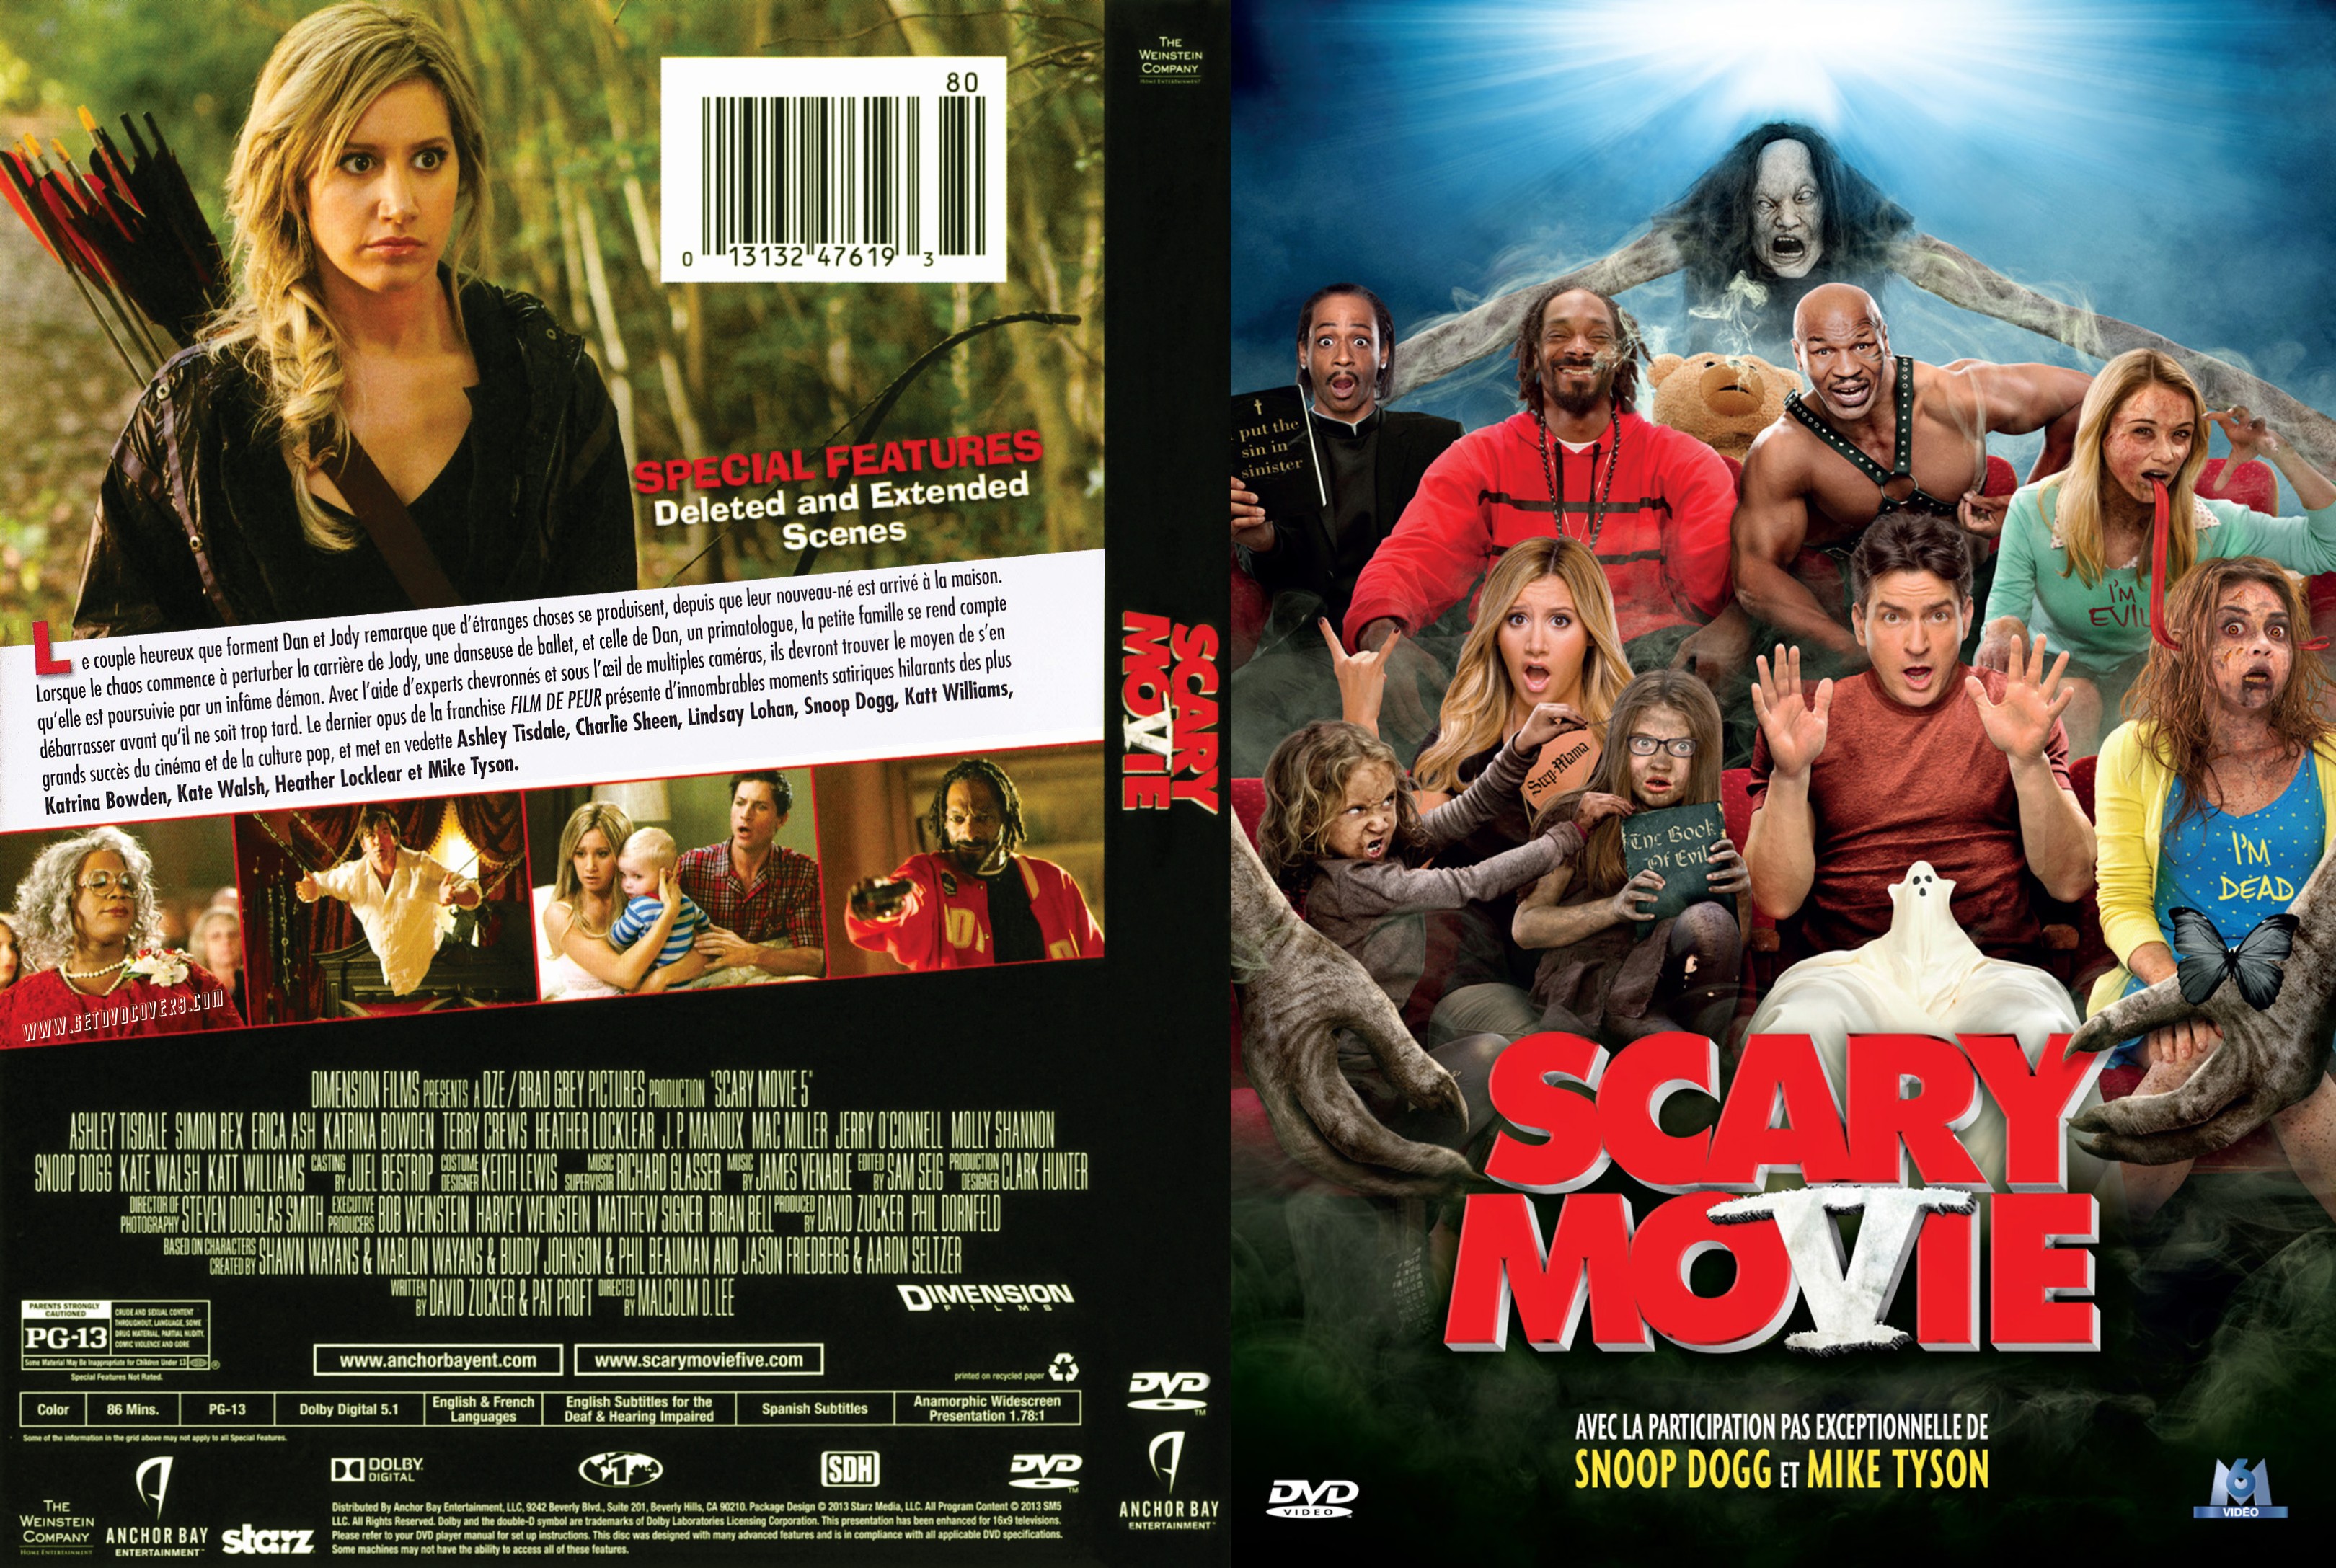 Jaquette DVD Scary Movie 5 custom